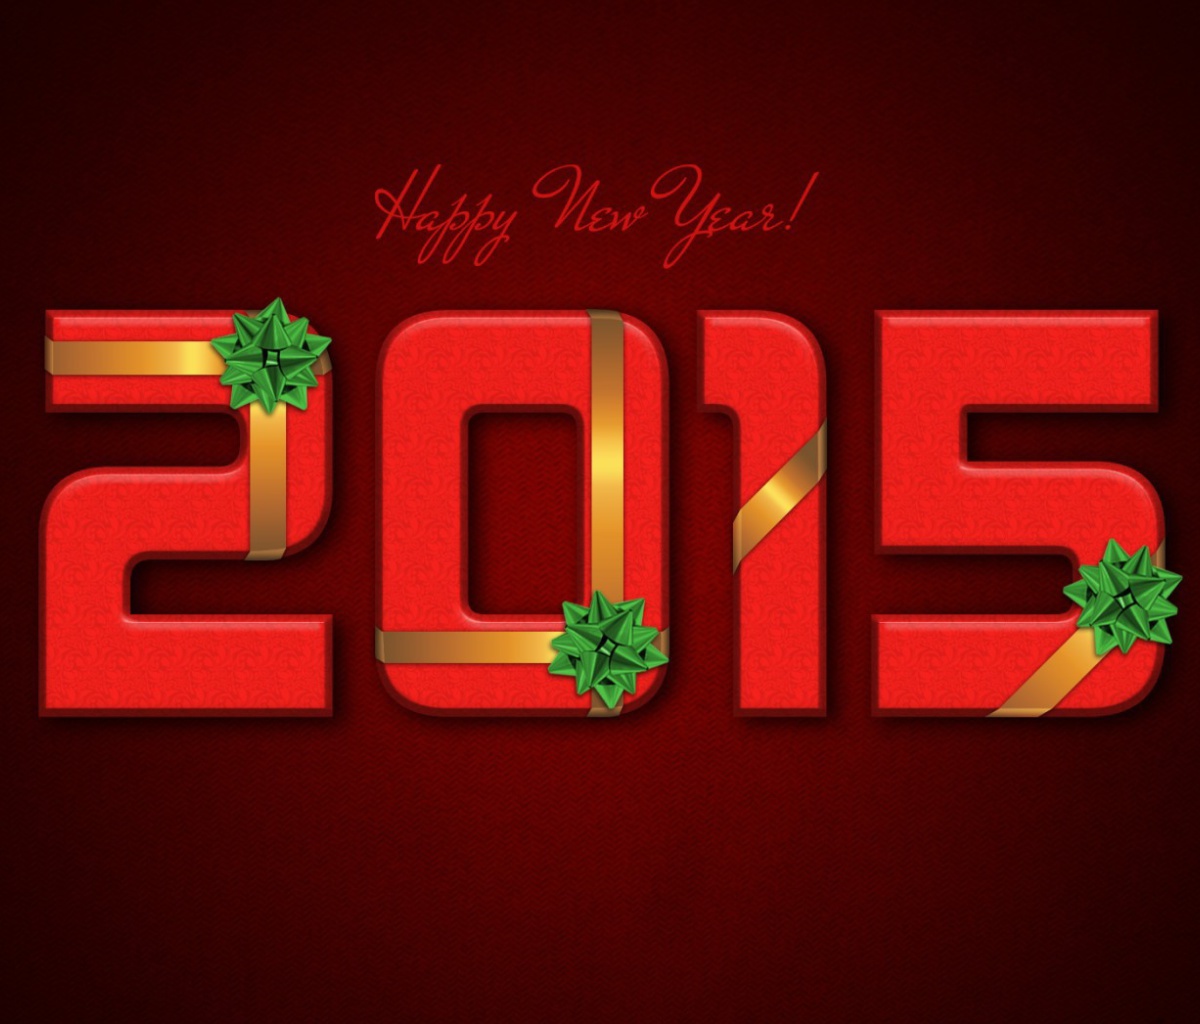 New Year 2015 Red Texture wallpaper 1200x1024